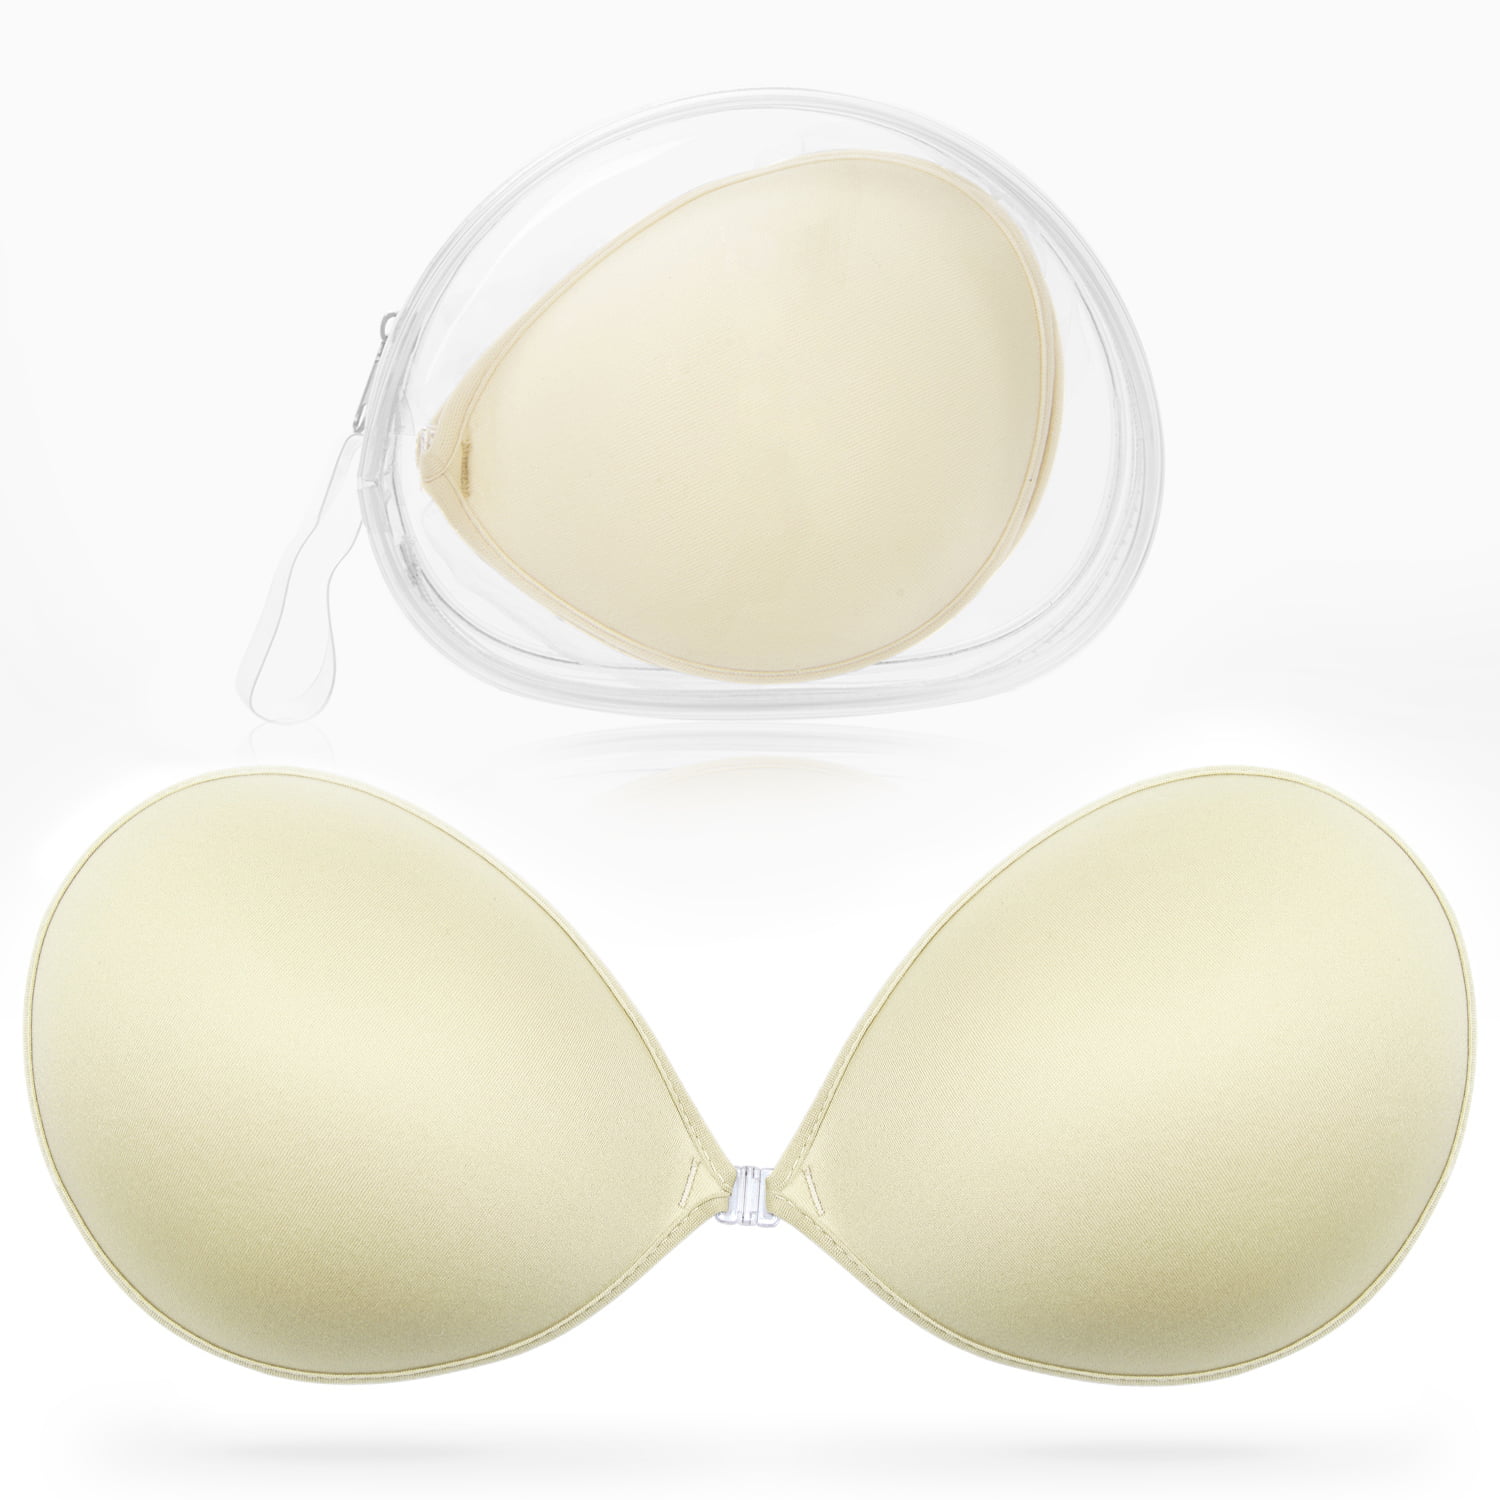 Wingslove Adhesive Bra Reusable Strapless Self Silicone - Import It All